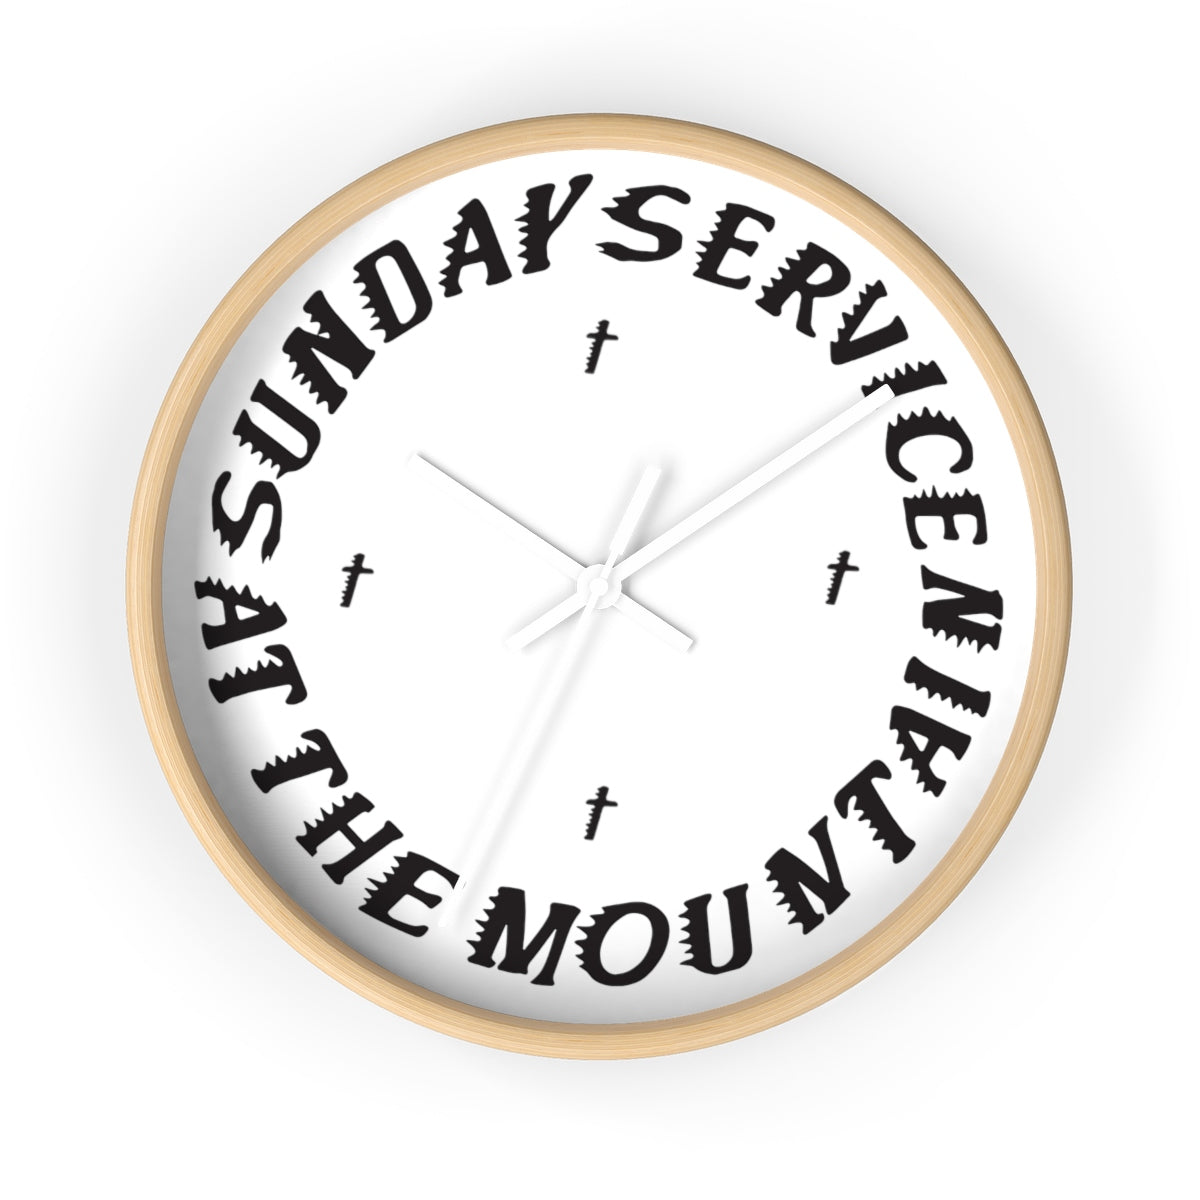 Sunday Service At The Mountain Wall clock - Kanye West Sunday Service Coachella-10 in-Wooden-White-Archethype